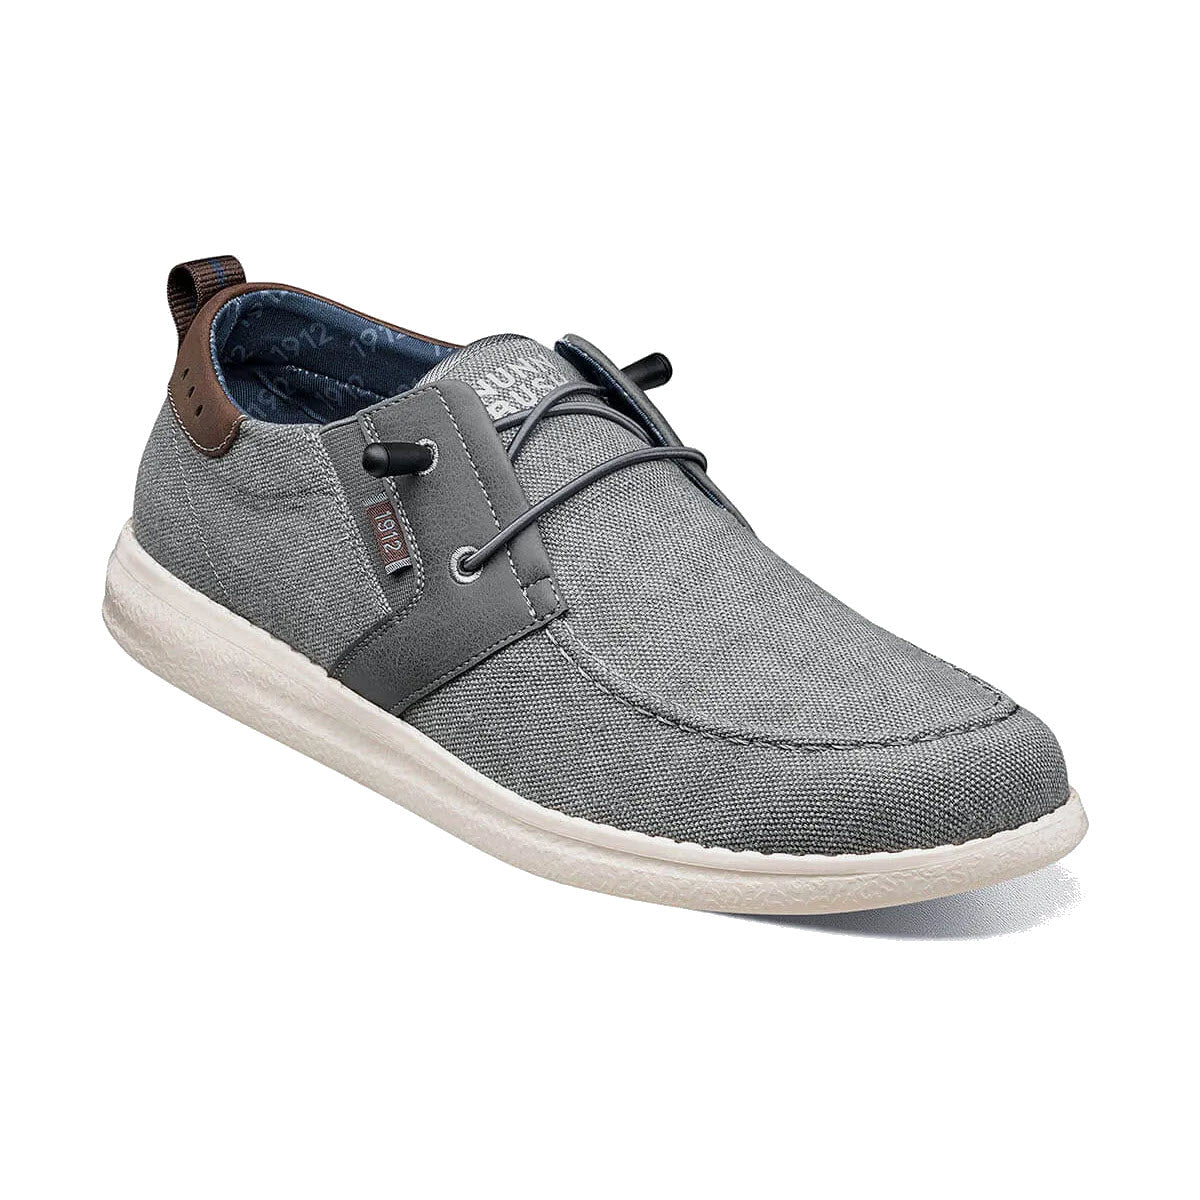 A single Nunn Bush Brewski Moc Toe Slip On Gray casual warm weather shoe with leather detailing and black laces on a white background.